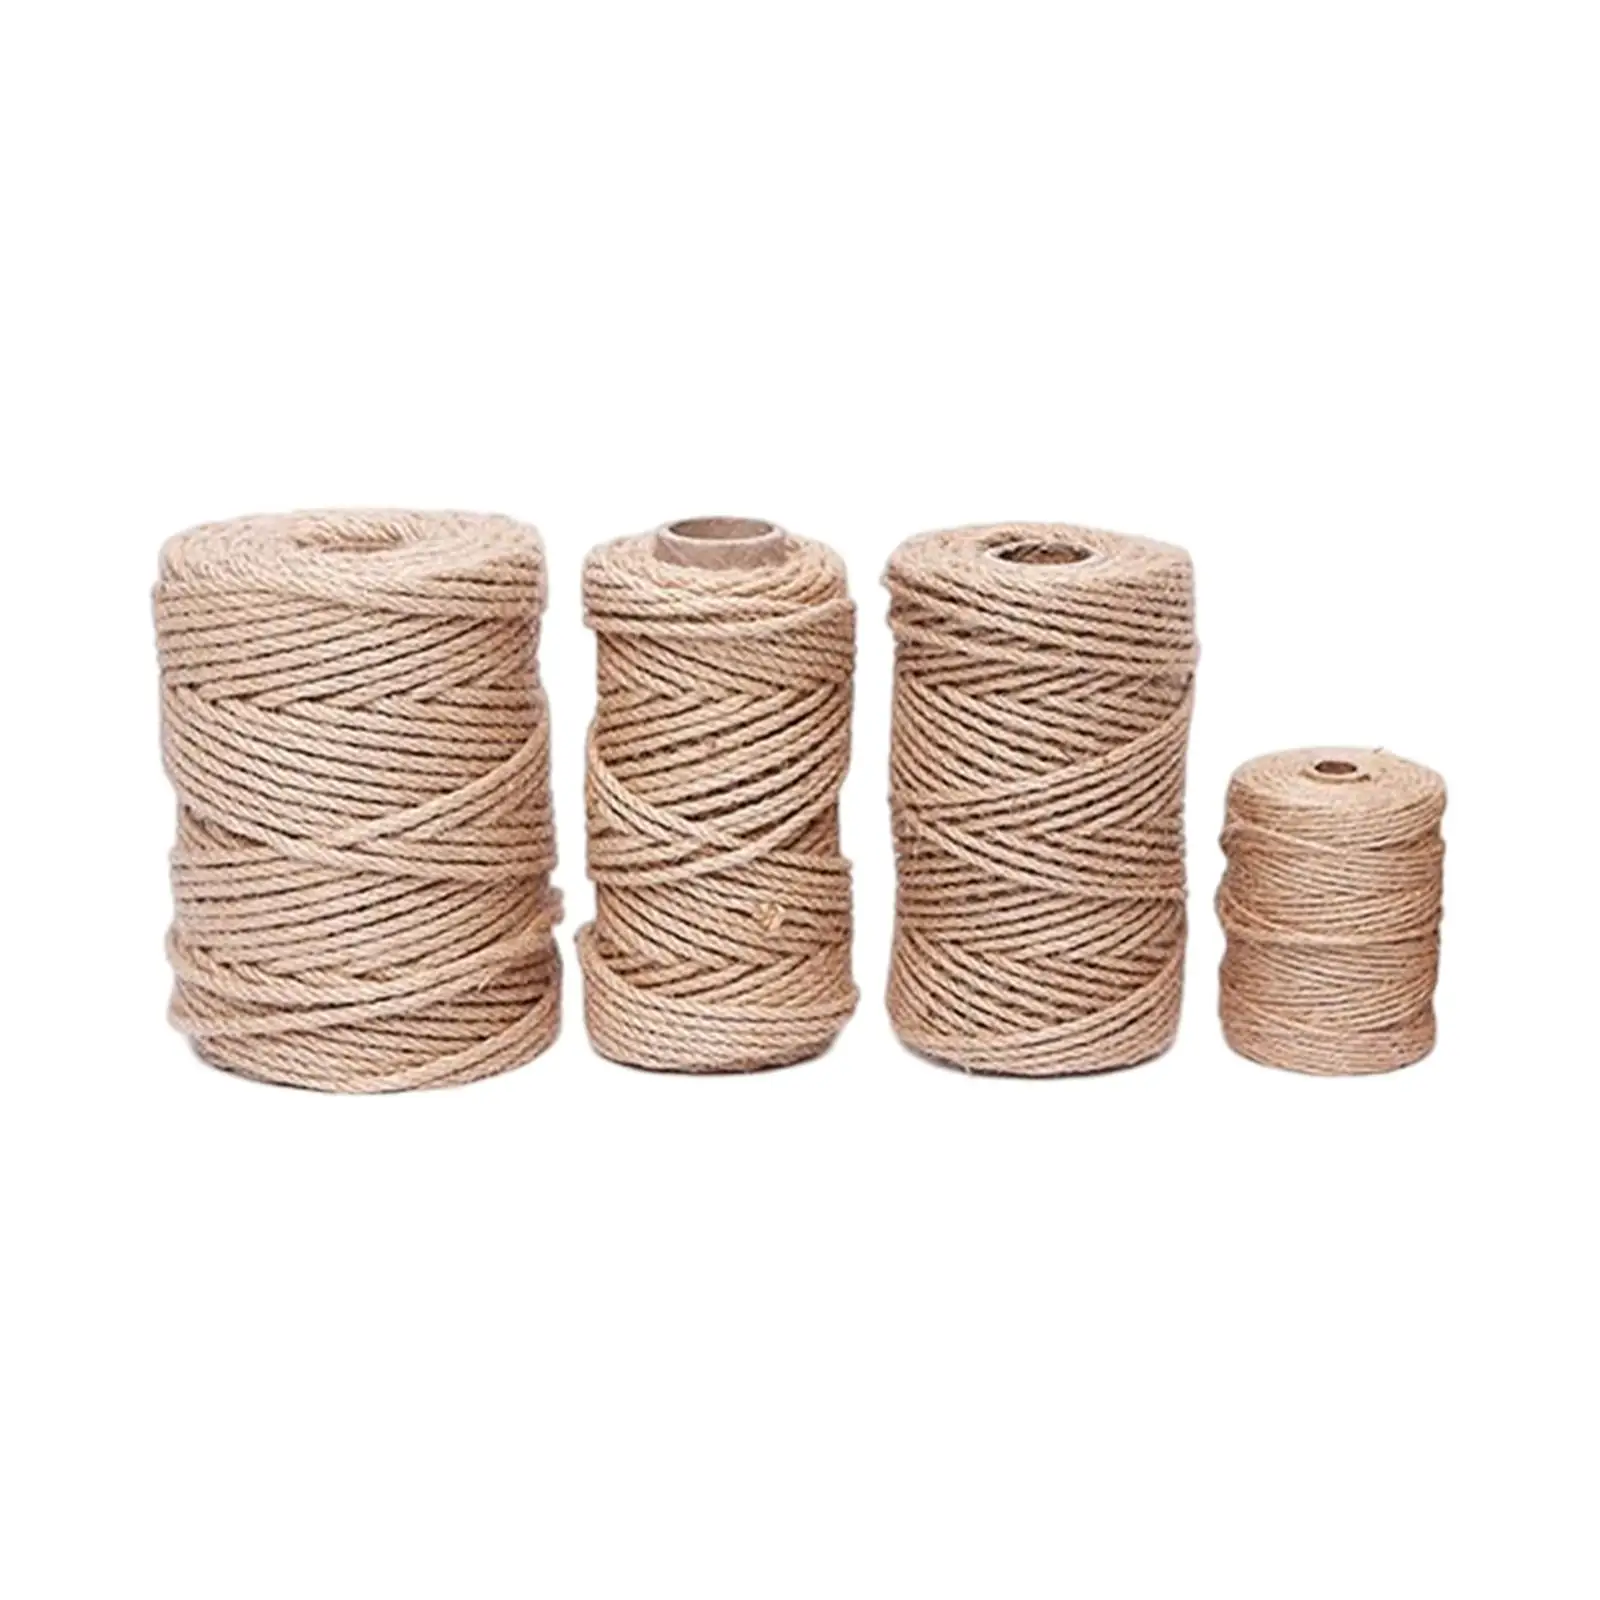 Jute Twine Desk Legs Binding Rope Sisal Ropes for Cat Scratch Post Home Garden Decor Cat Scratch Boards Accessories Cats Tree